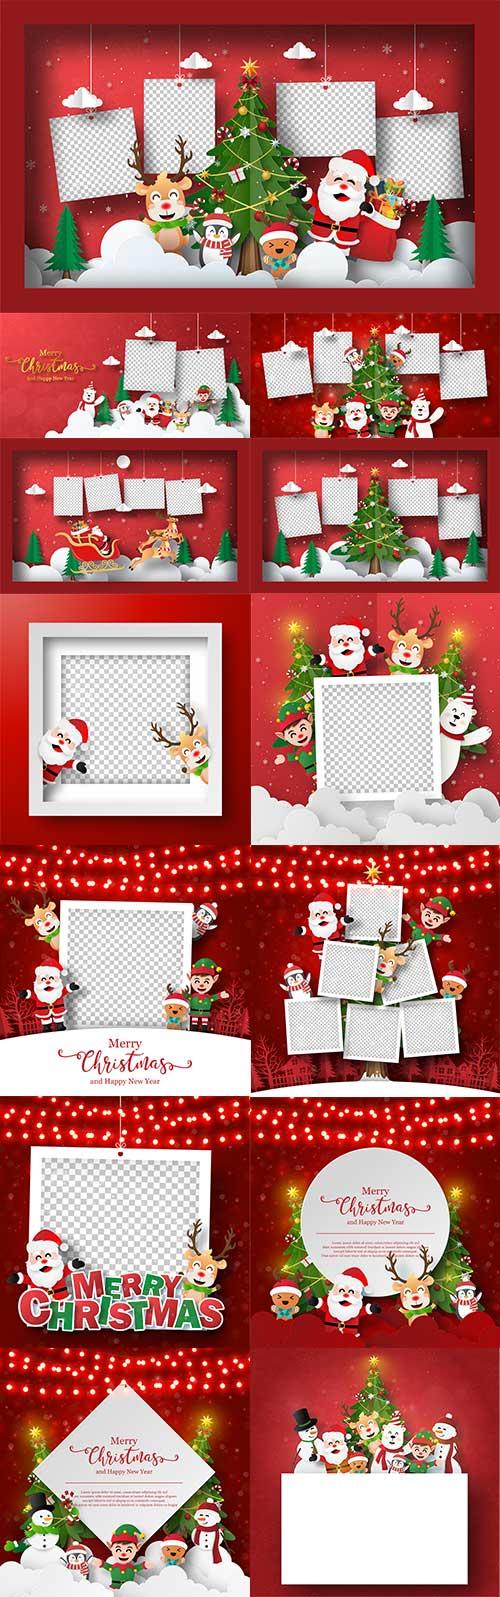 Christmas vector backgrounds with photo frames